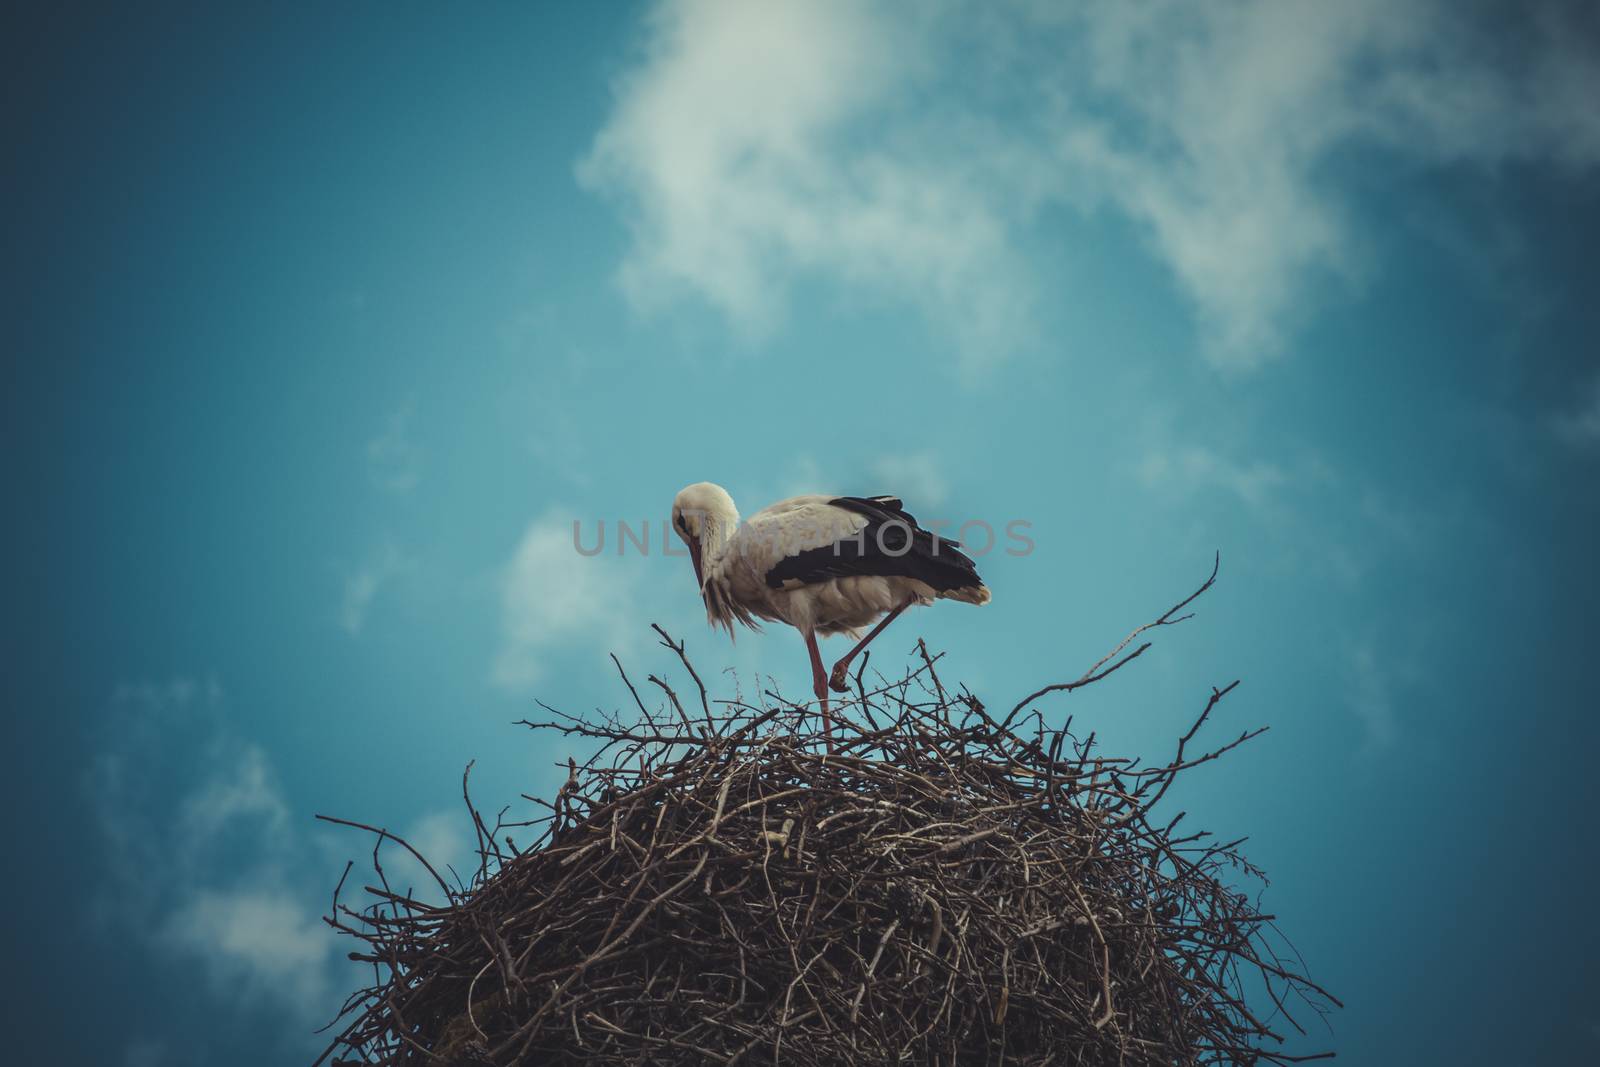 Migratory, Stork nest made ������of tree branches over blue sky by FernandoCortes